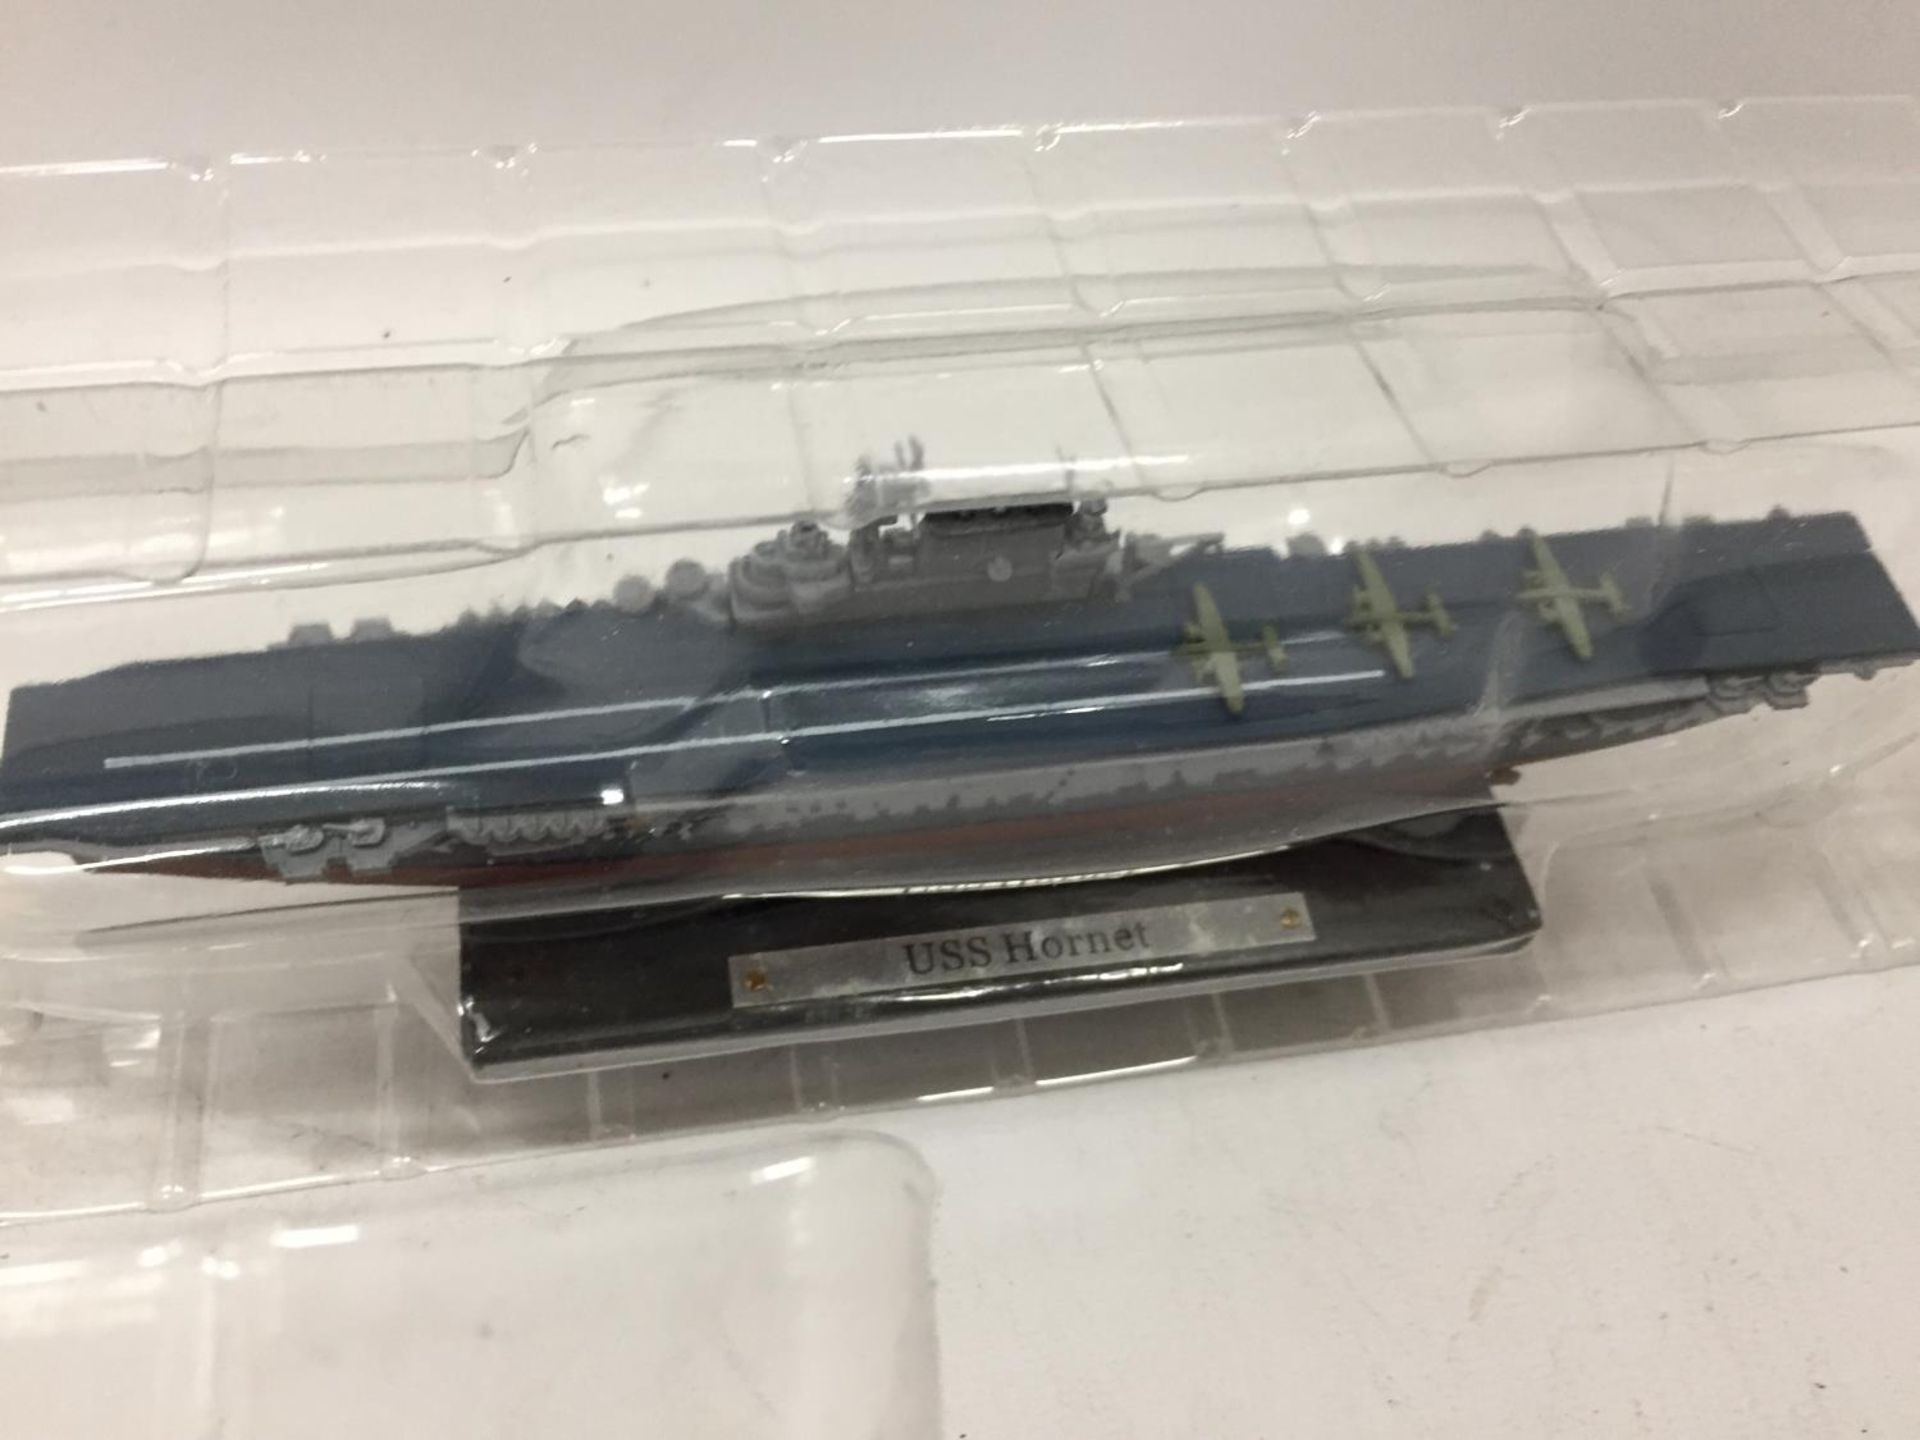 TWO DEAGOSTINI MODELS OF SHIPS - USS ARIZONA AND USS HORNET - Image 4 of 4